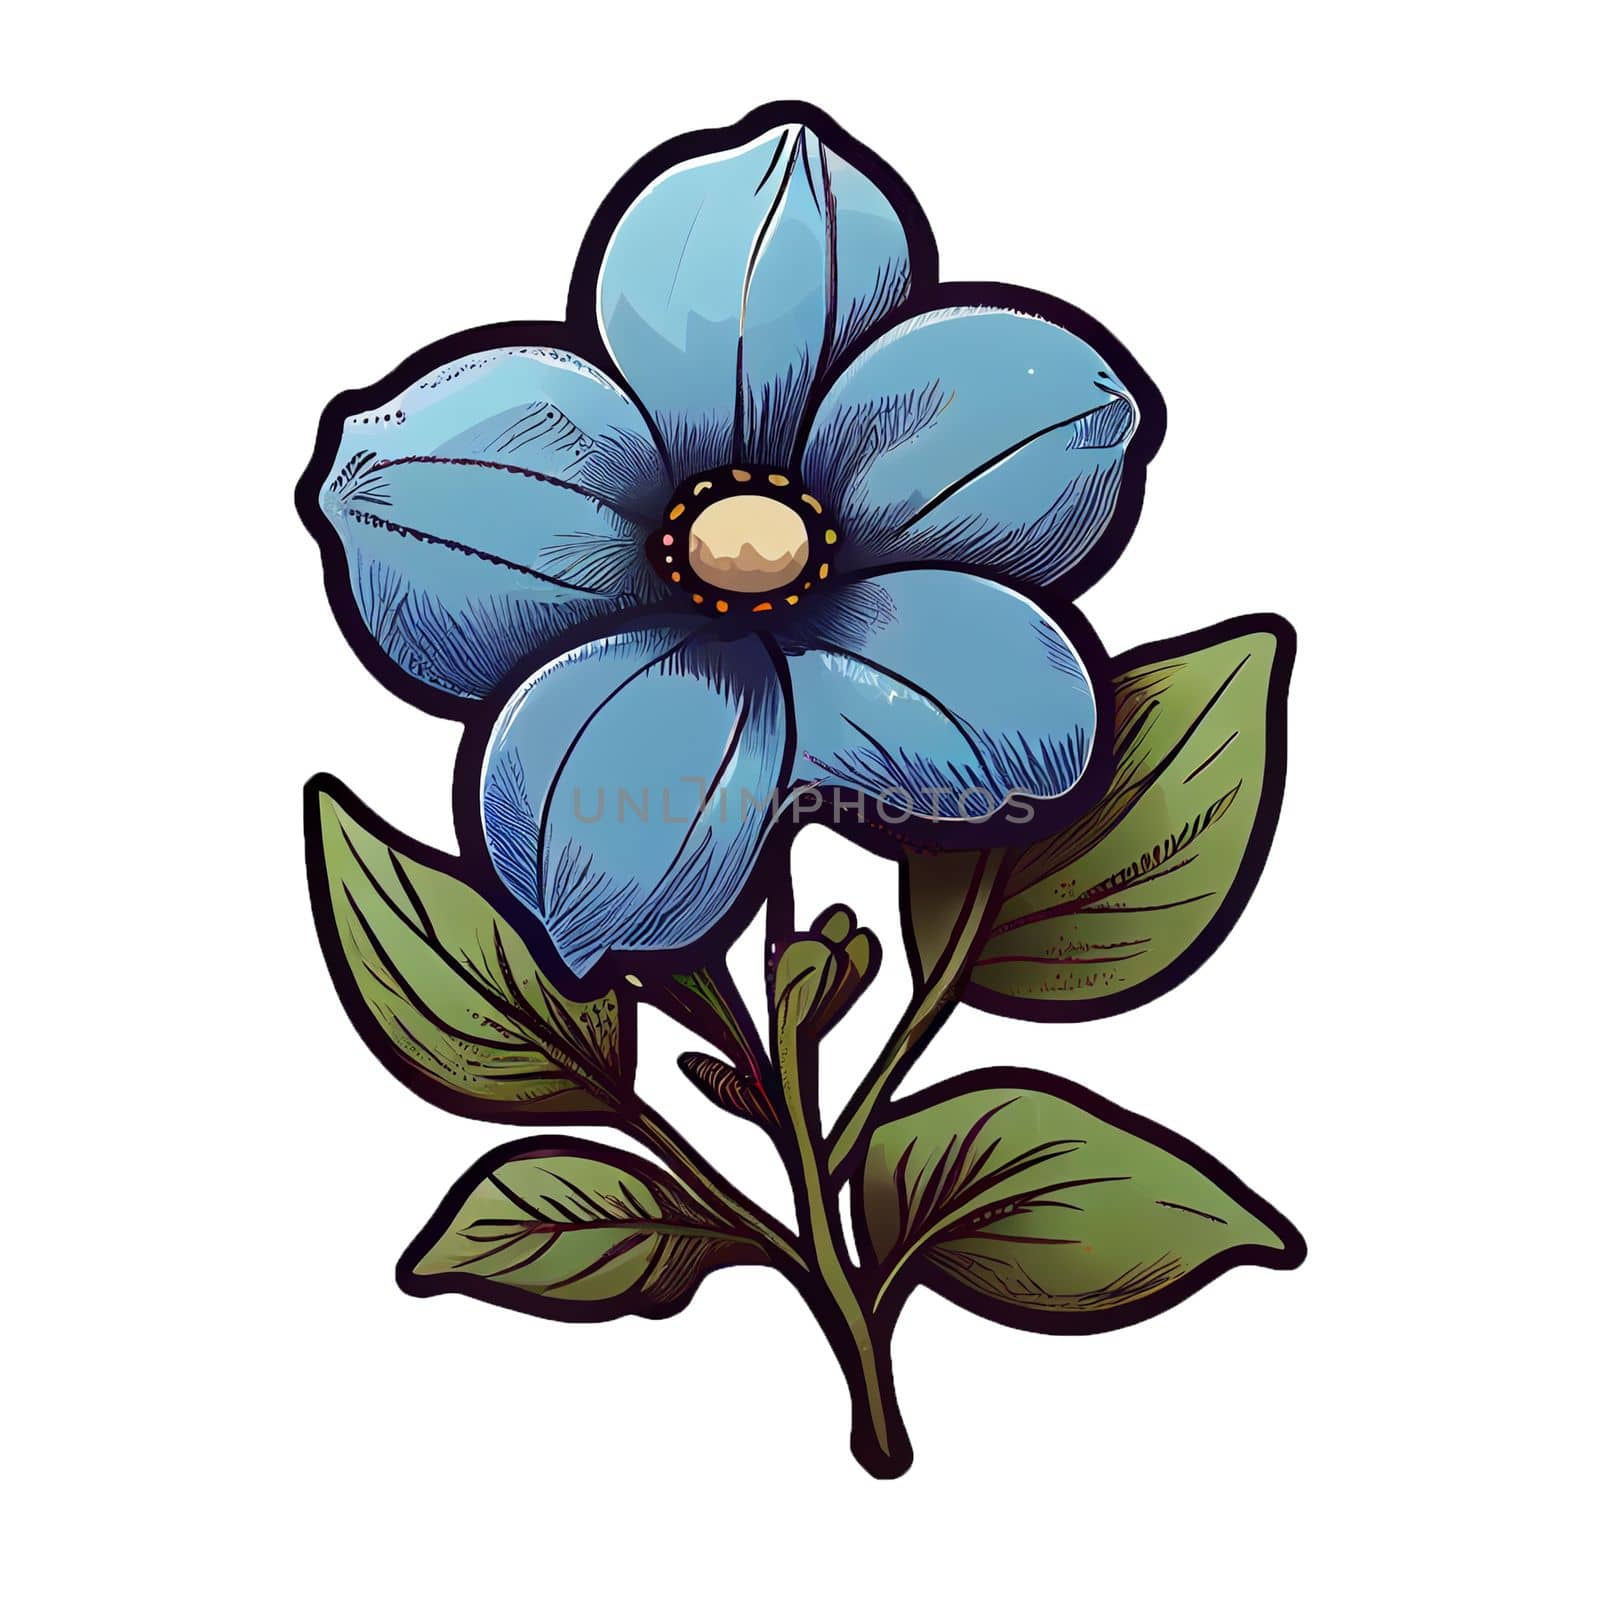 Cute blue flower hand drawn element, for decorating  Valentines Day or Mothers Day card. Sticker design.